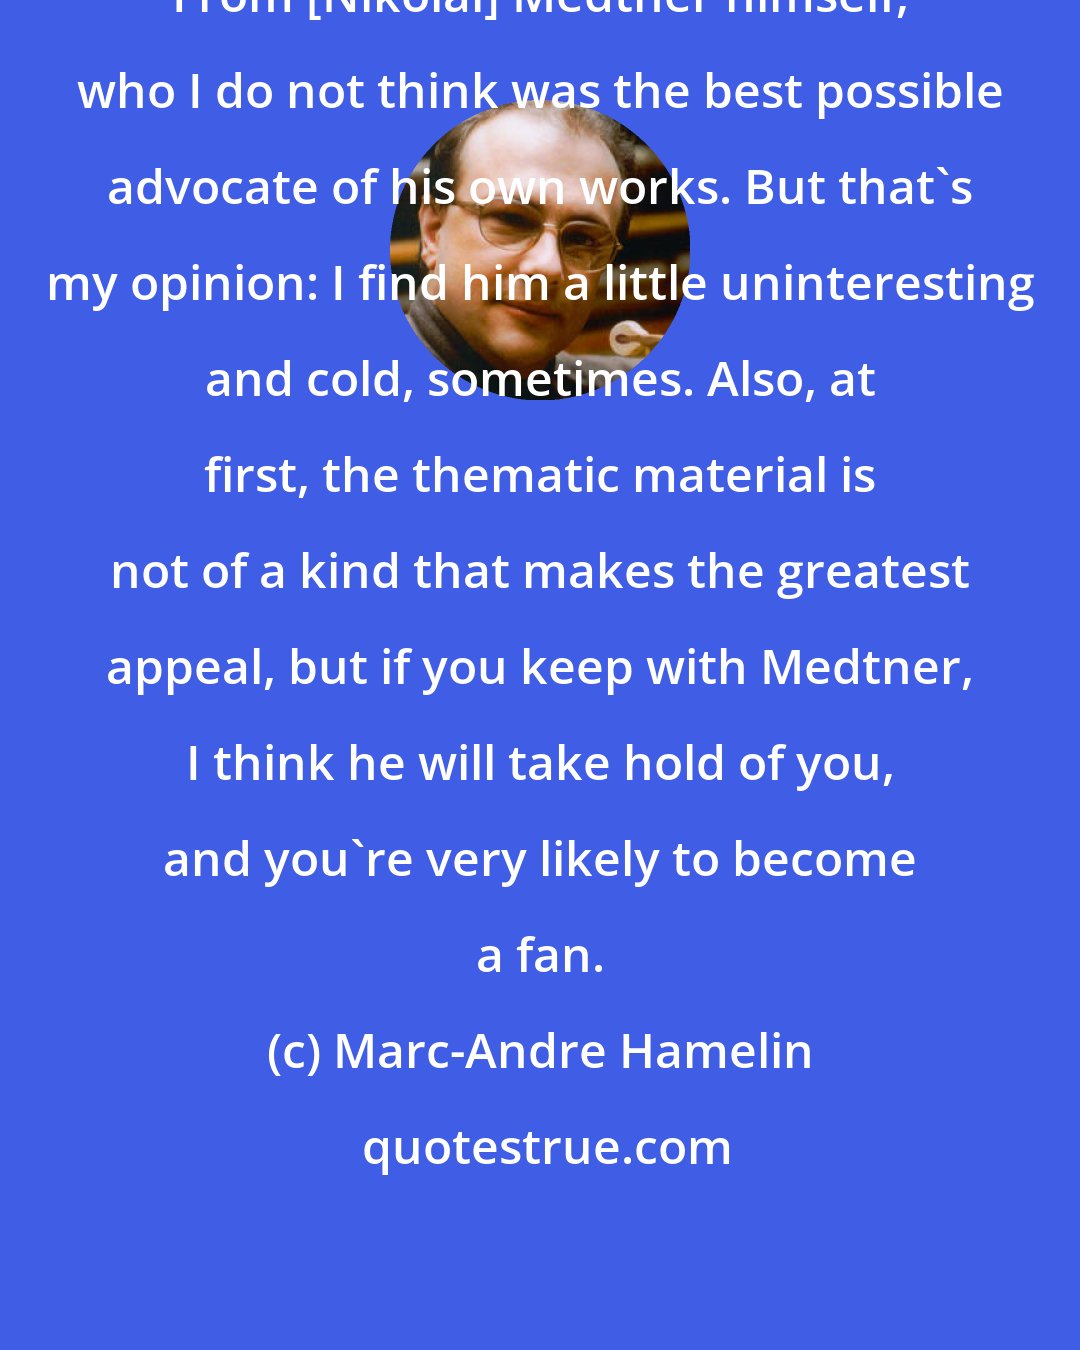 Marc-Andre Hamelin: From [Nikolai] Medtner himself, who I do not think was the best possible advocate of his own works. But that's my opinion: I find him a little uninteresting and cold, sometimes. Also, at first, the thematic material is not of a kind that makes the greatest appeal, but if you keep with Medtner, I think he will take hold of you, and you're very likely to become a fan.